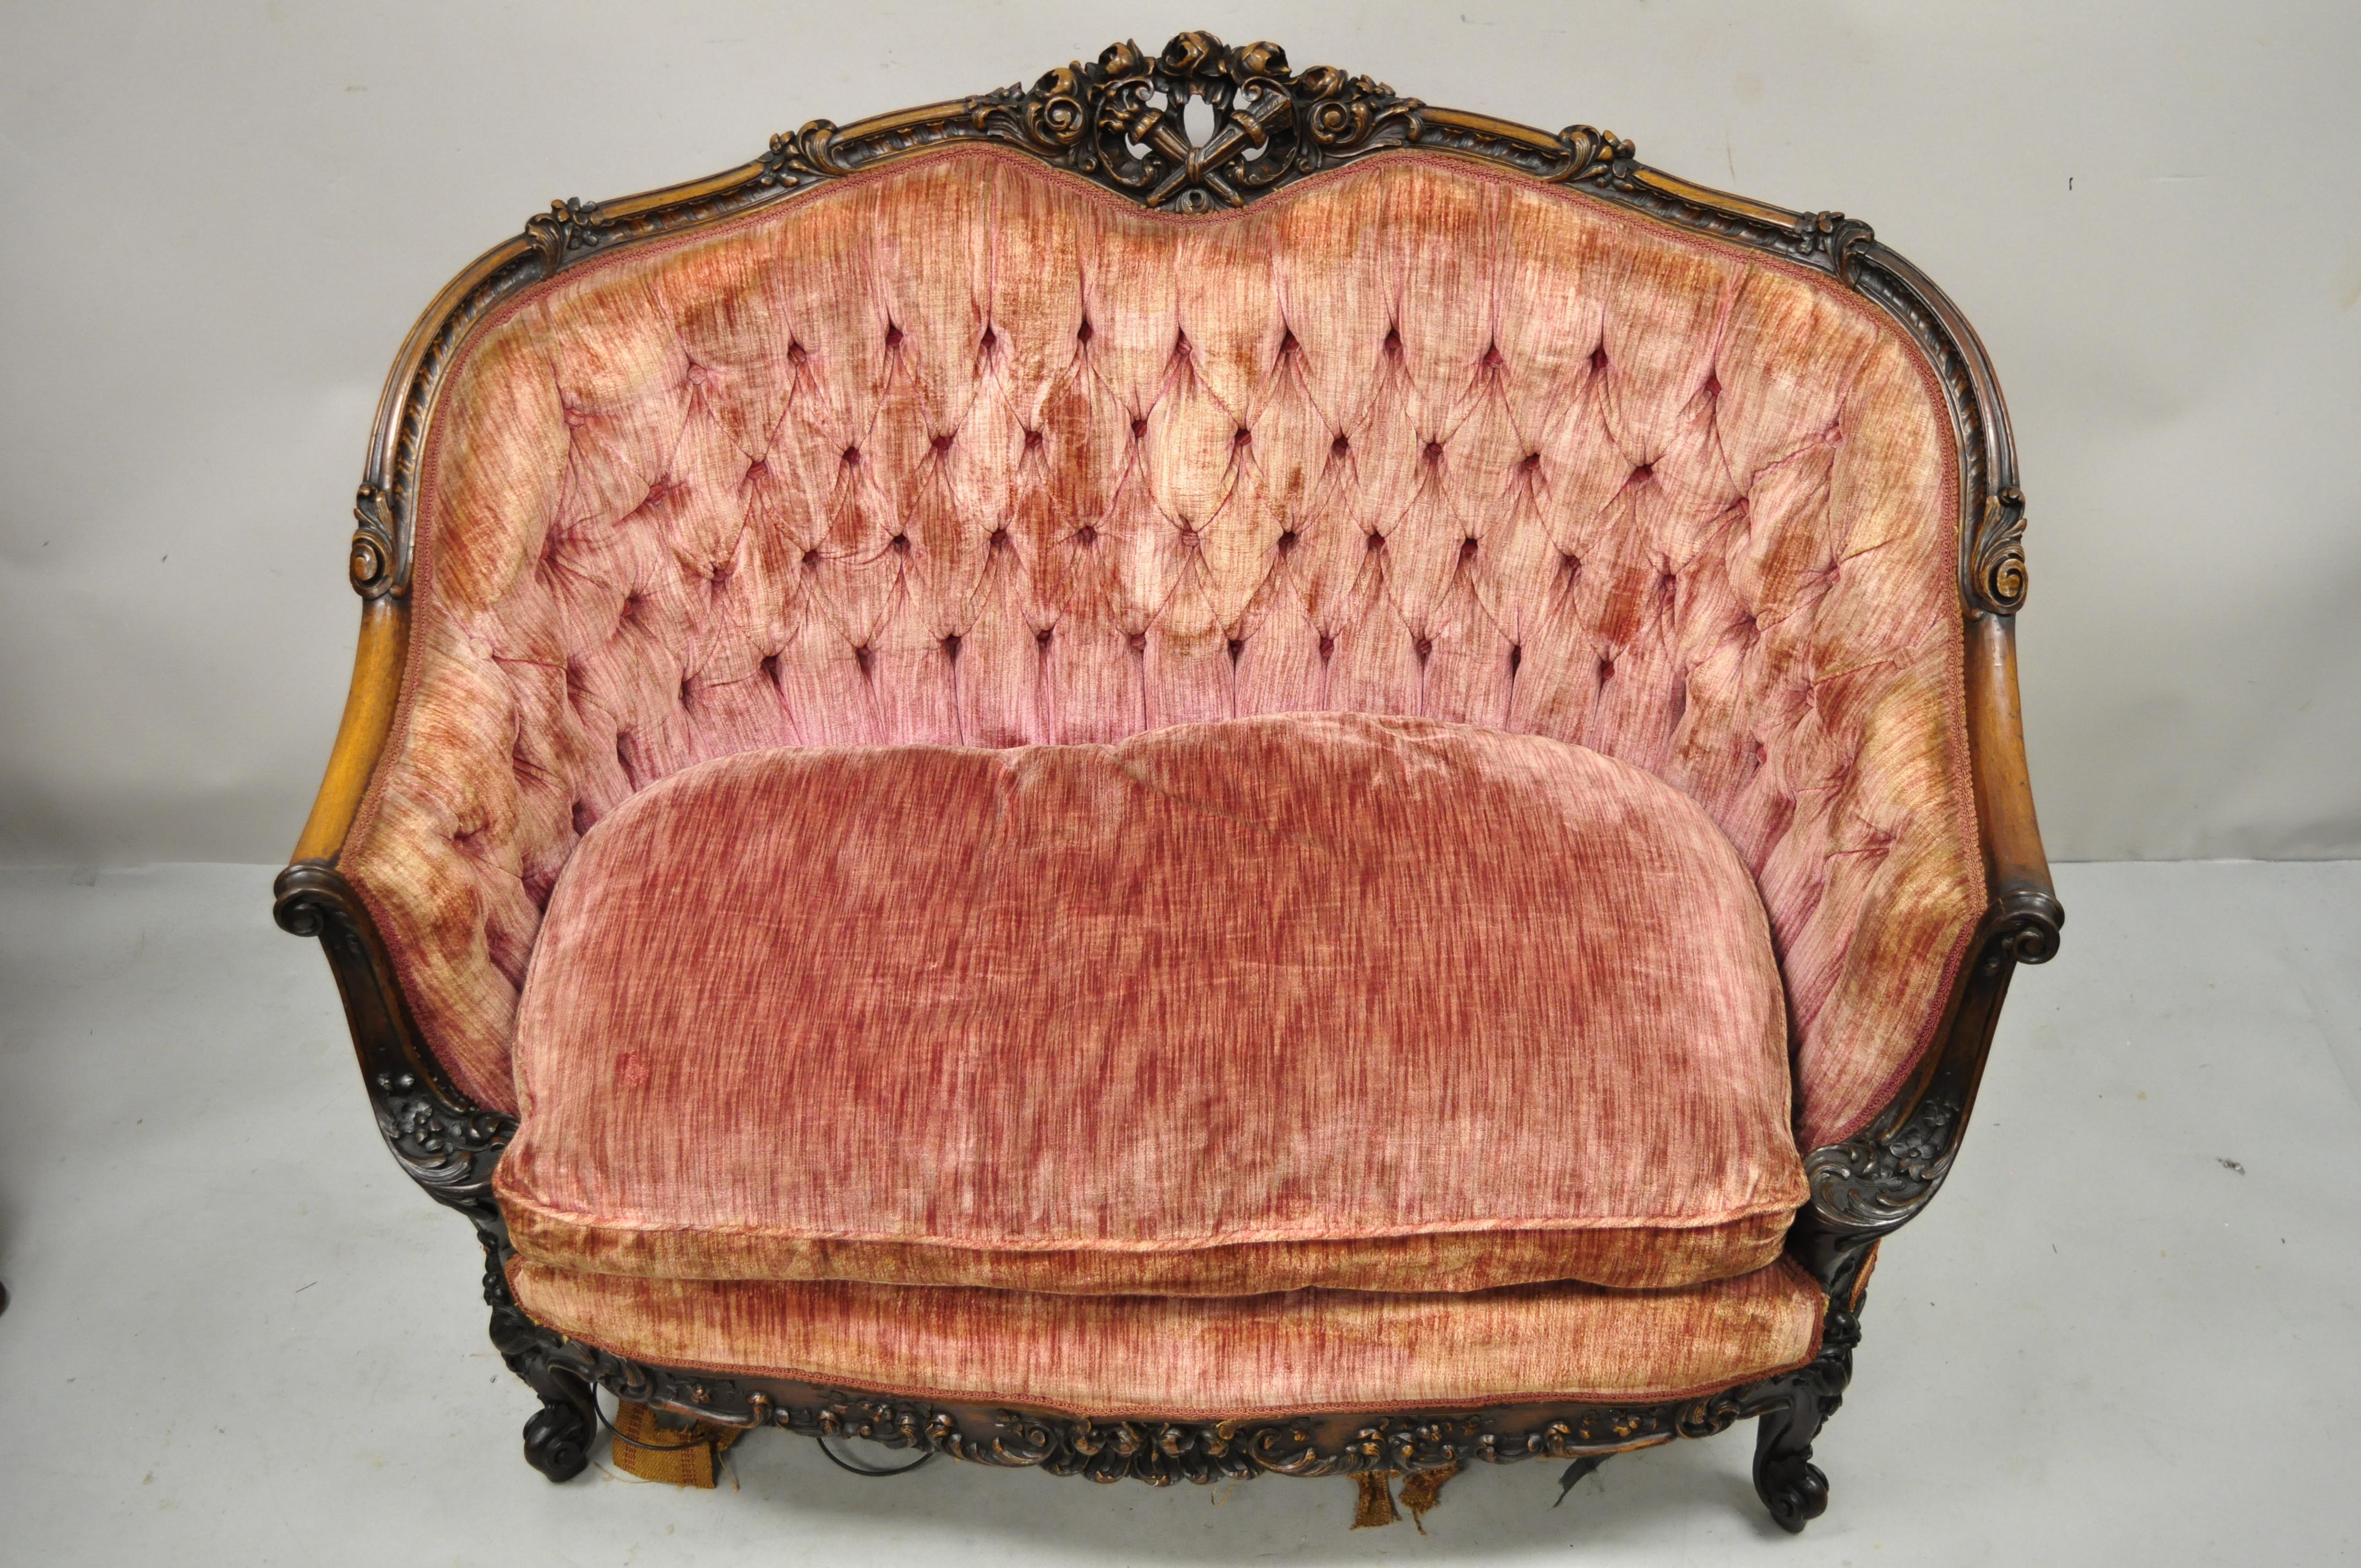 Antique French Louis XV Rococo Style Ornate Carved Mahogany Settee Loveseat Sofa For Sale 4